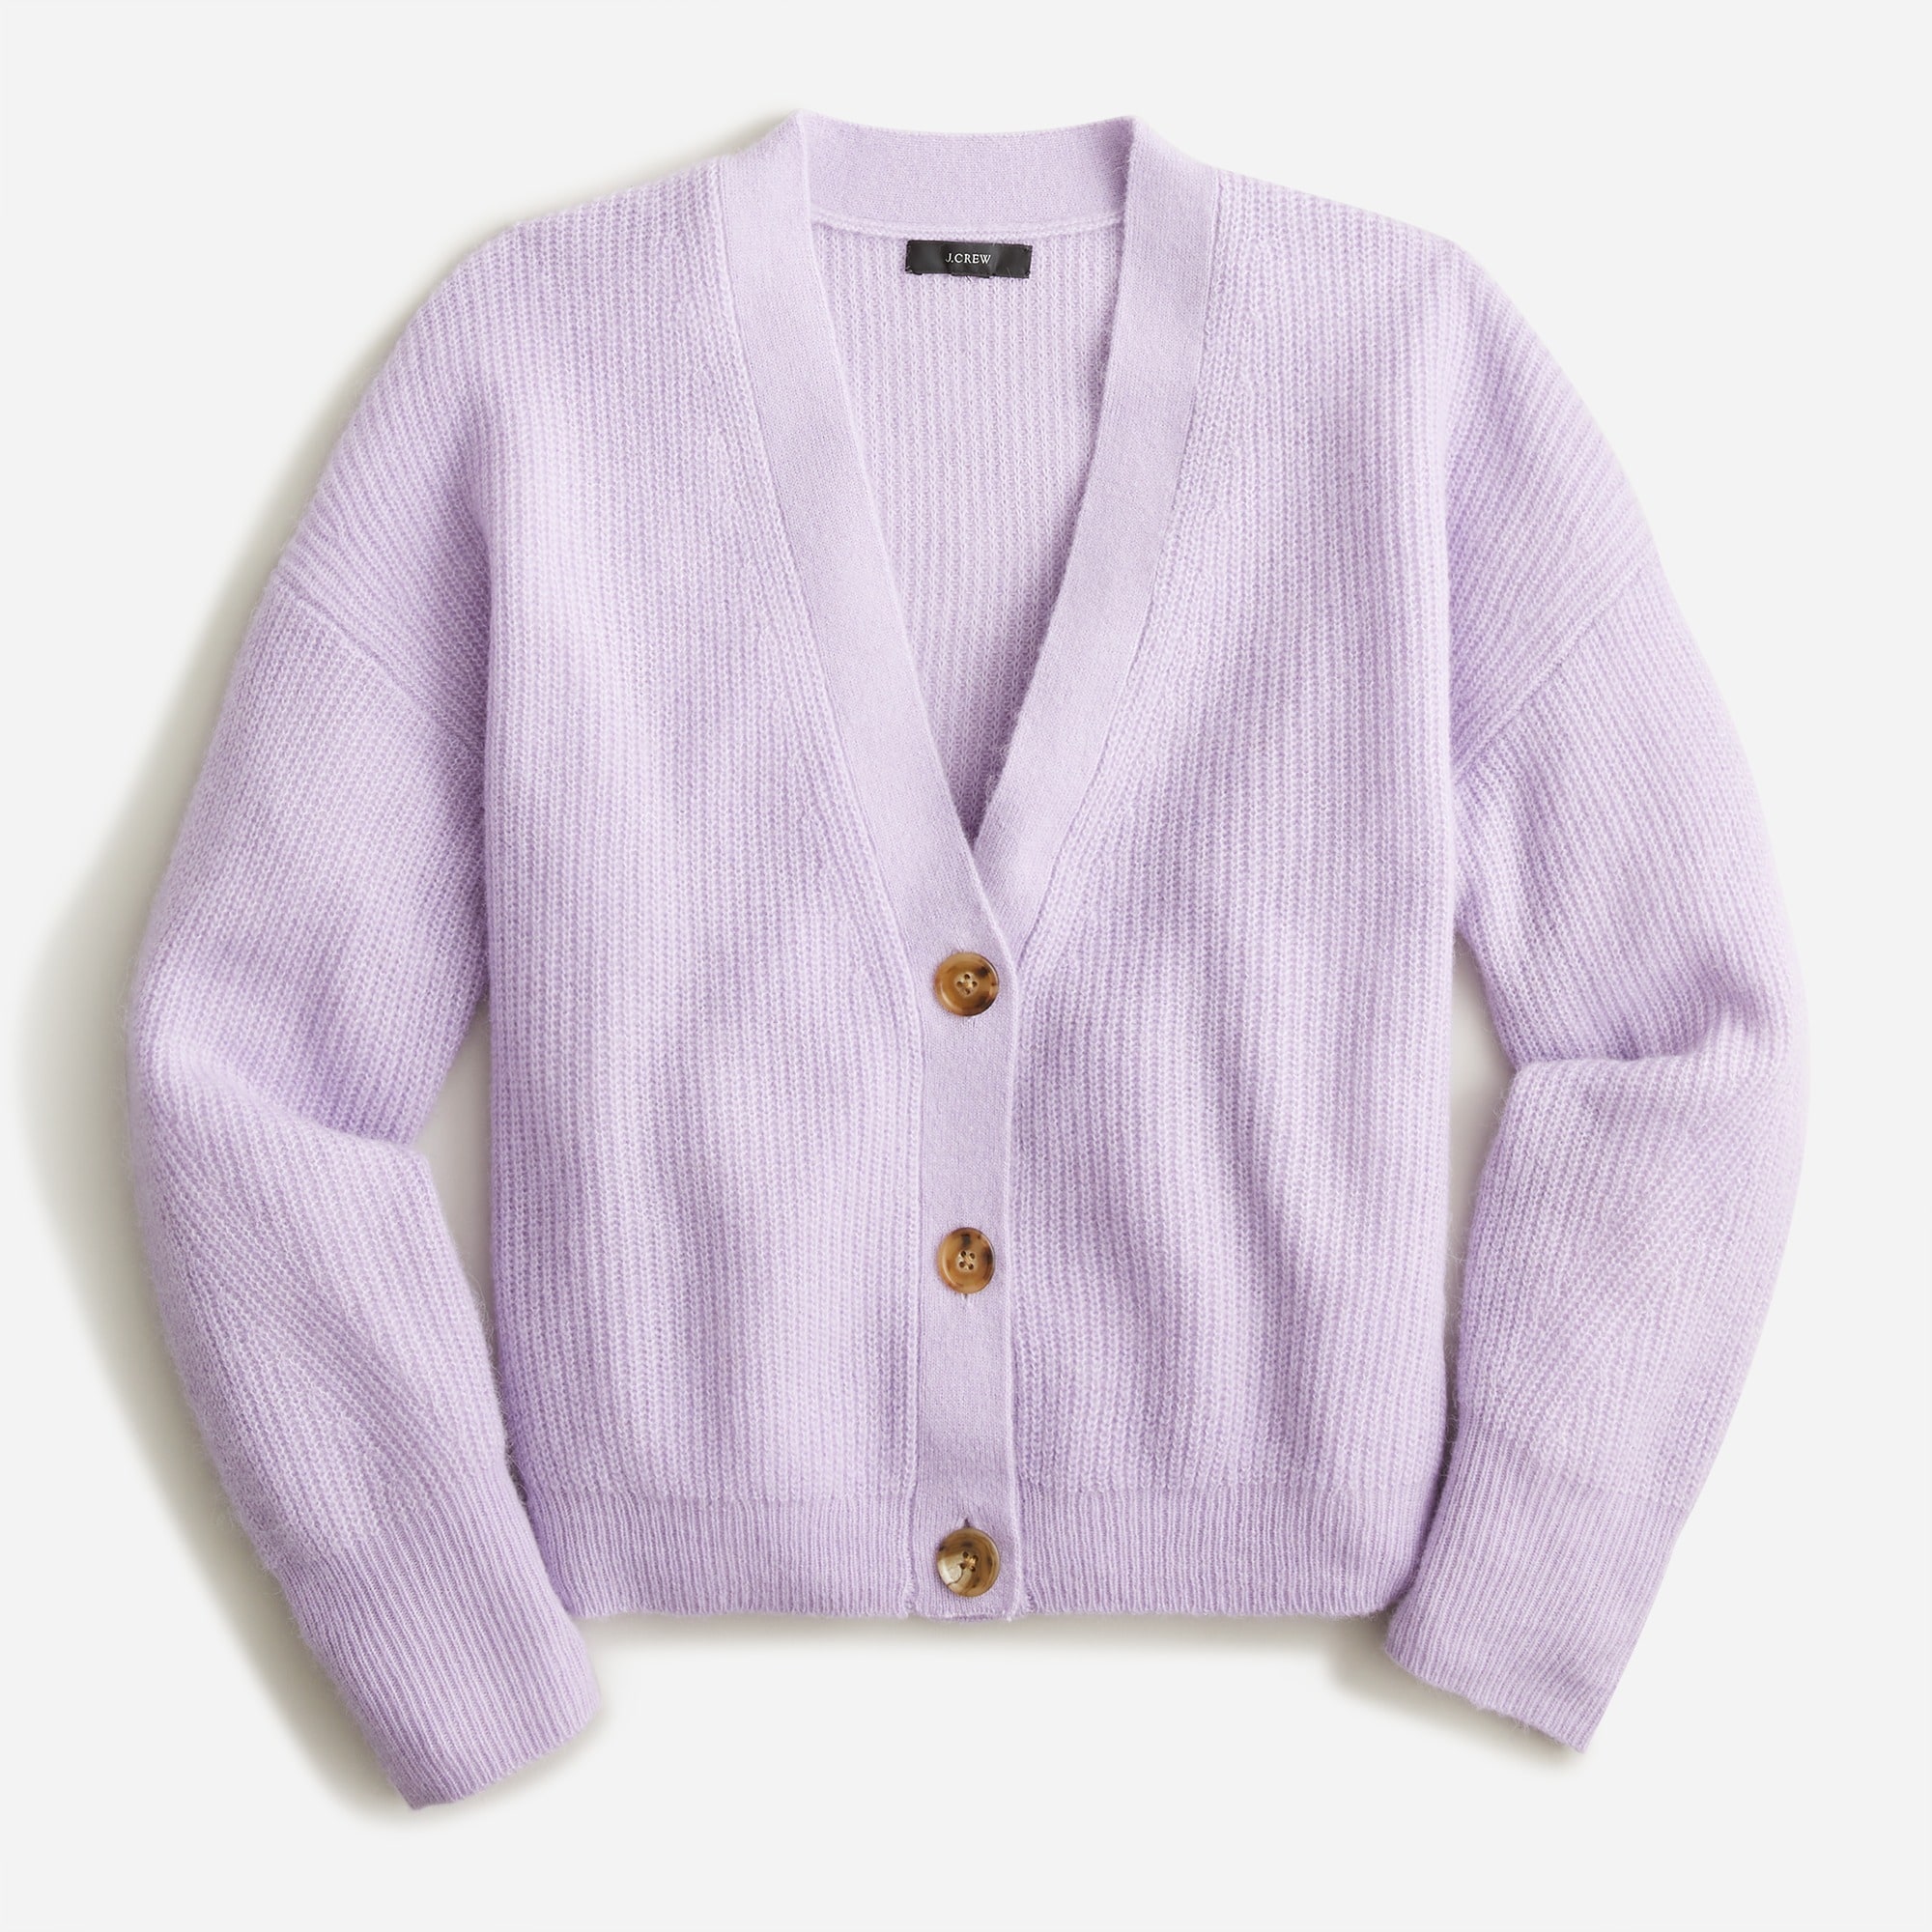 J.Crew: Ribbed V-neck Cardigan Sweater For Women